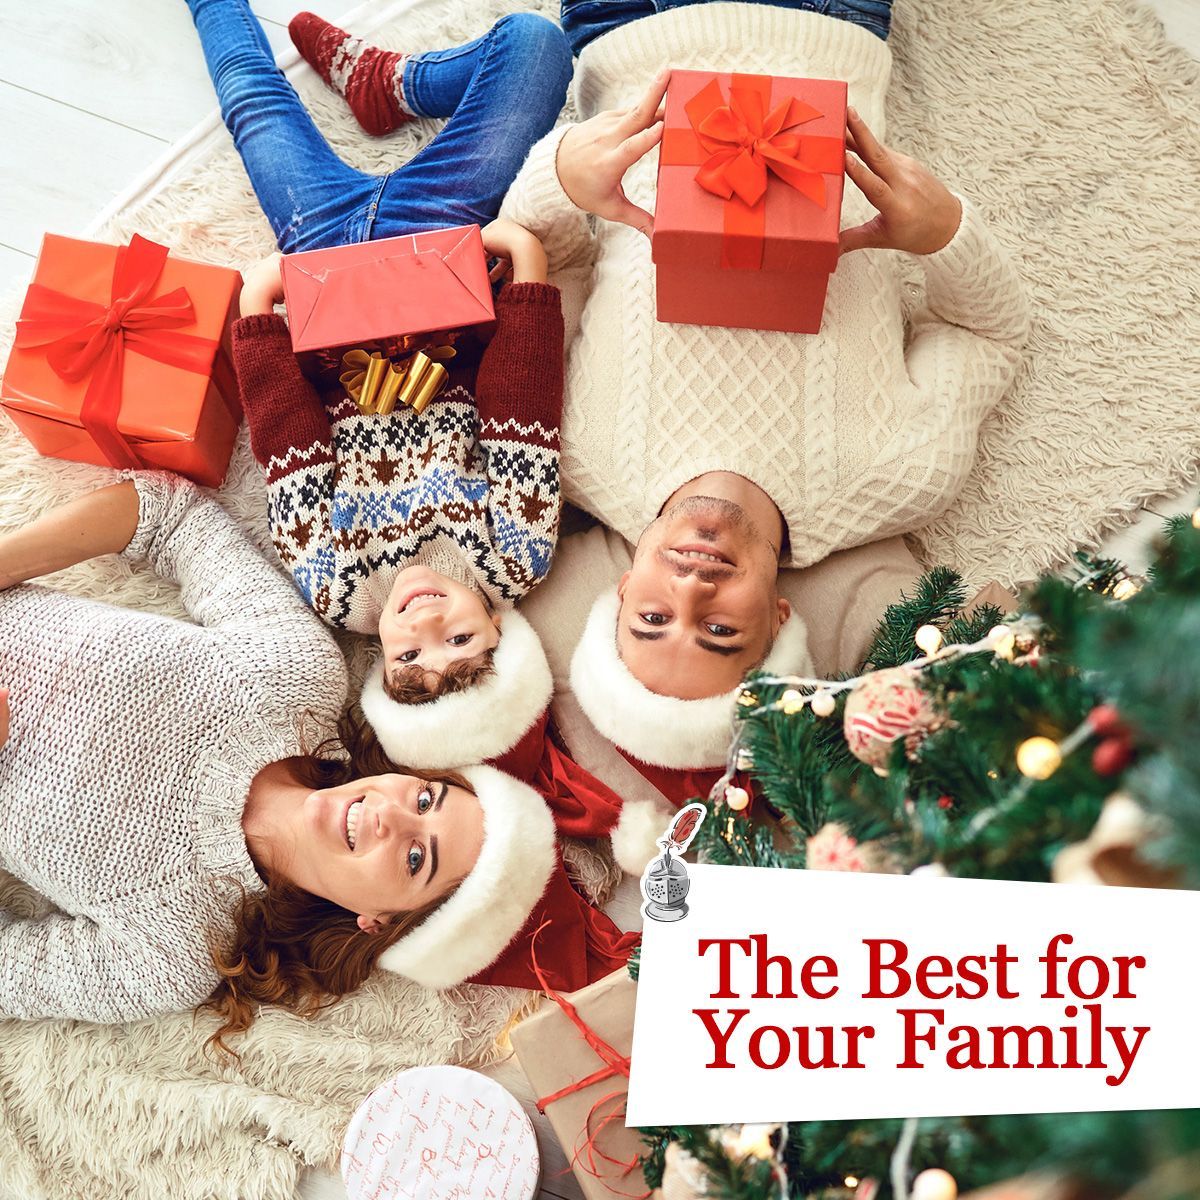 The Best for Your Family